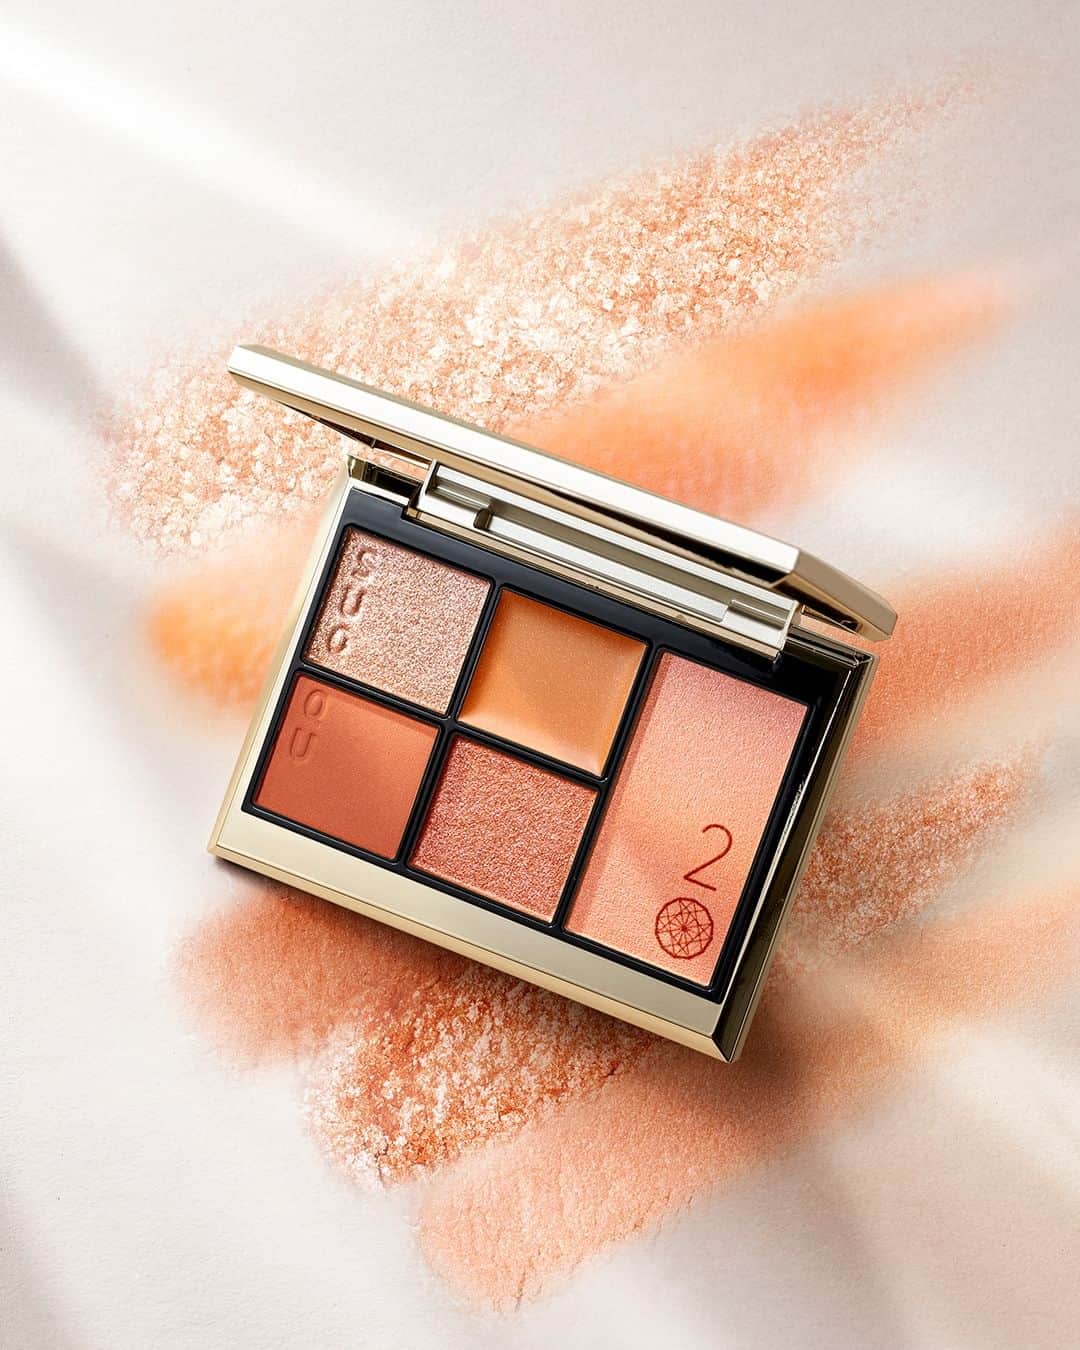 SUQQU公式Instgramアカウントのインスタグラム：「The angles created by movement, the day’s dazzling light, the night’s gentle glow... The palette contains four shades of eyeshadows that create different looks at different times and a sheer blush that reveals the skin’s natural beauty.  20th ANNIVERSARY EYE & BLUSH COMPACT 101 -TOUKOUGASANE [limited color]  An orange palette that offers a healthy and modern look. The chic tones and exquisite shades create an in-season look with a difference. https://bit.ly/2RD93fd  動きによる角度、昼のまばゆい光、夜のおだやかな光― その時々でさまざまな表情を生み出す4色のアイと、肌が持つ本来の美しさを引きだすようなシアーなブラッシュを1つのパレットにセット。  20th アニバーサリー アイ ＆ ブラッシュ コンパクト 101 橙光重 -TOUKOUGASANE [限定色]  ヘルシーさとモダンさを兼ね備えたオレンジパレット。 粋な色合いと絶妙な陰影で、ひと味違った旬の顔に。 https://onlineshop.suqqu.com/ja/lp/2023-SUQQU-20th-anniversary-collection/?utm_source=facebook&utm_medium=post&utm_campaign=organic  #SUQQU #スック #jbeauty #cosmetics #SUQQU20th #SUQQUcolormakeup #アイ＆ブラッシュコンパクト」